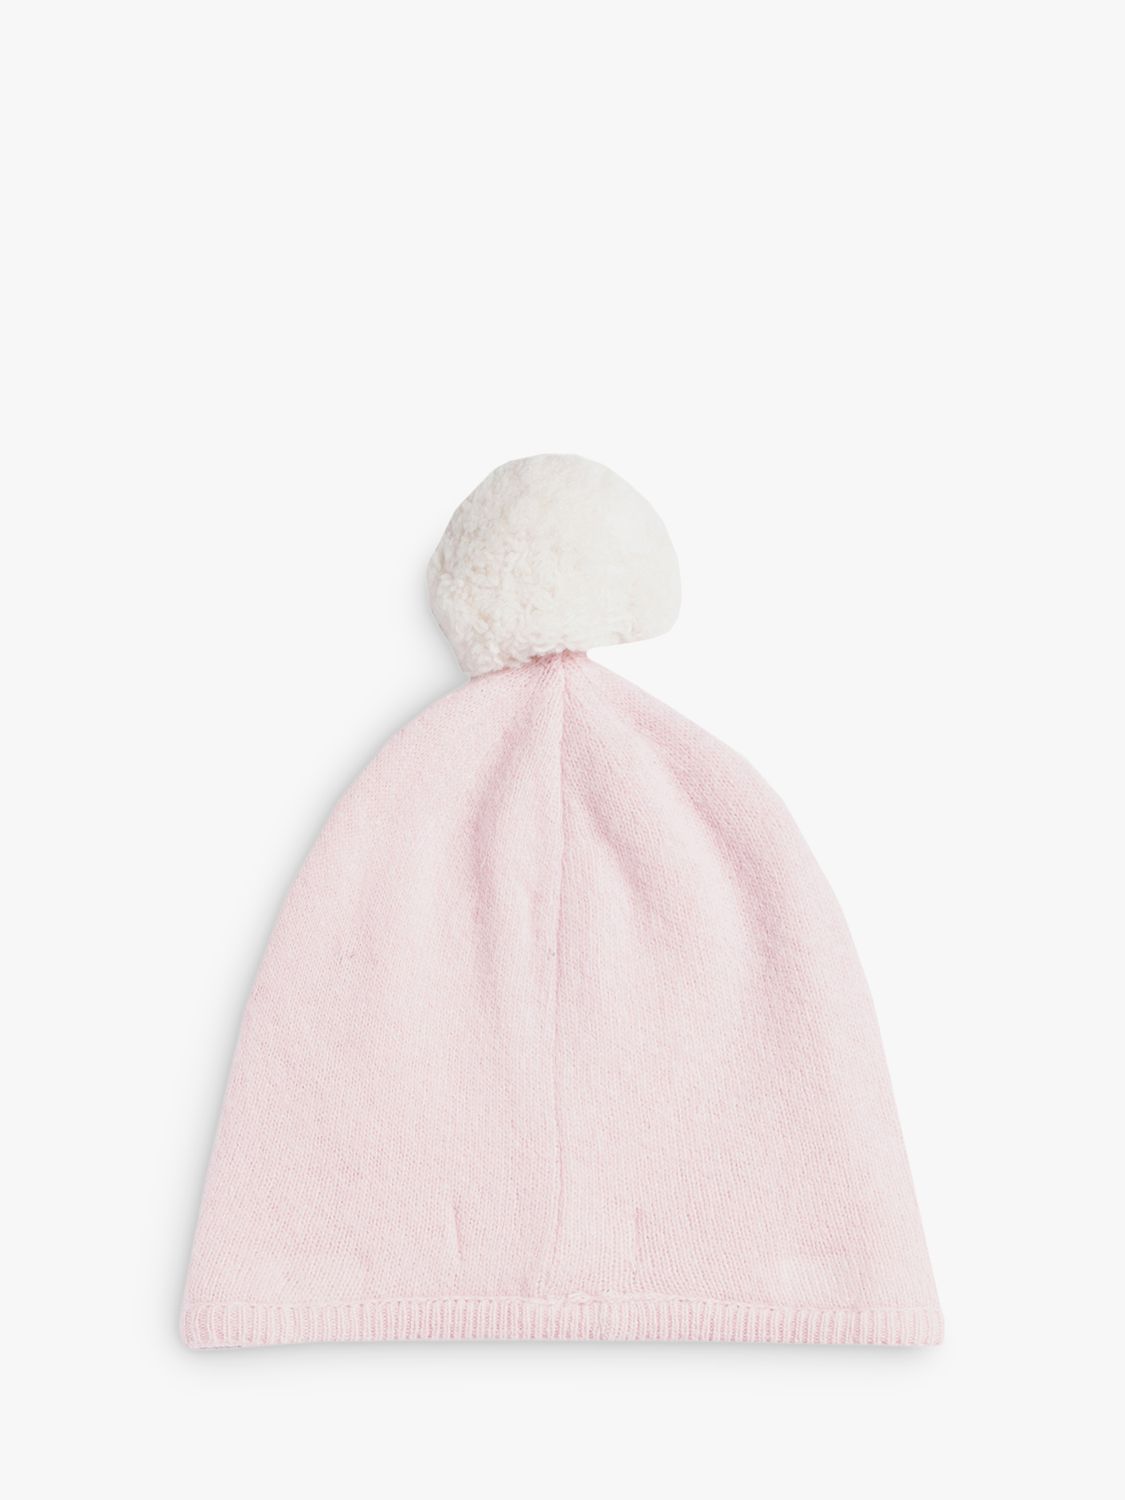 Trotters Baby Jemima Bobble Hat, Pale Pink, S-M